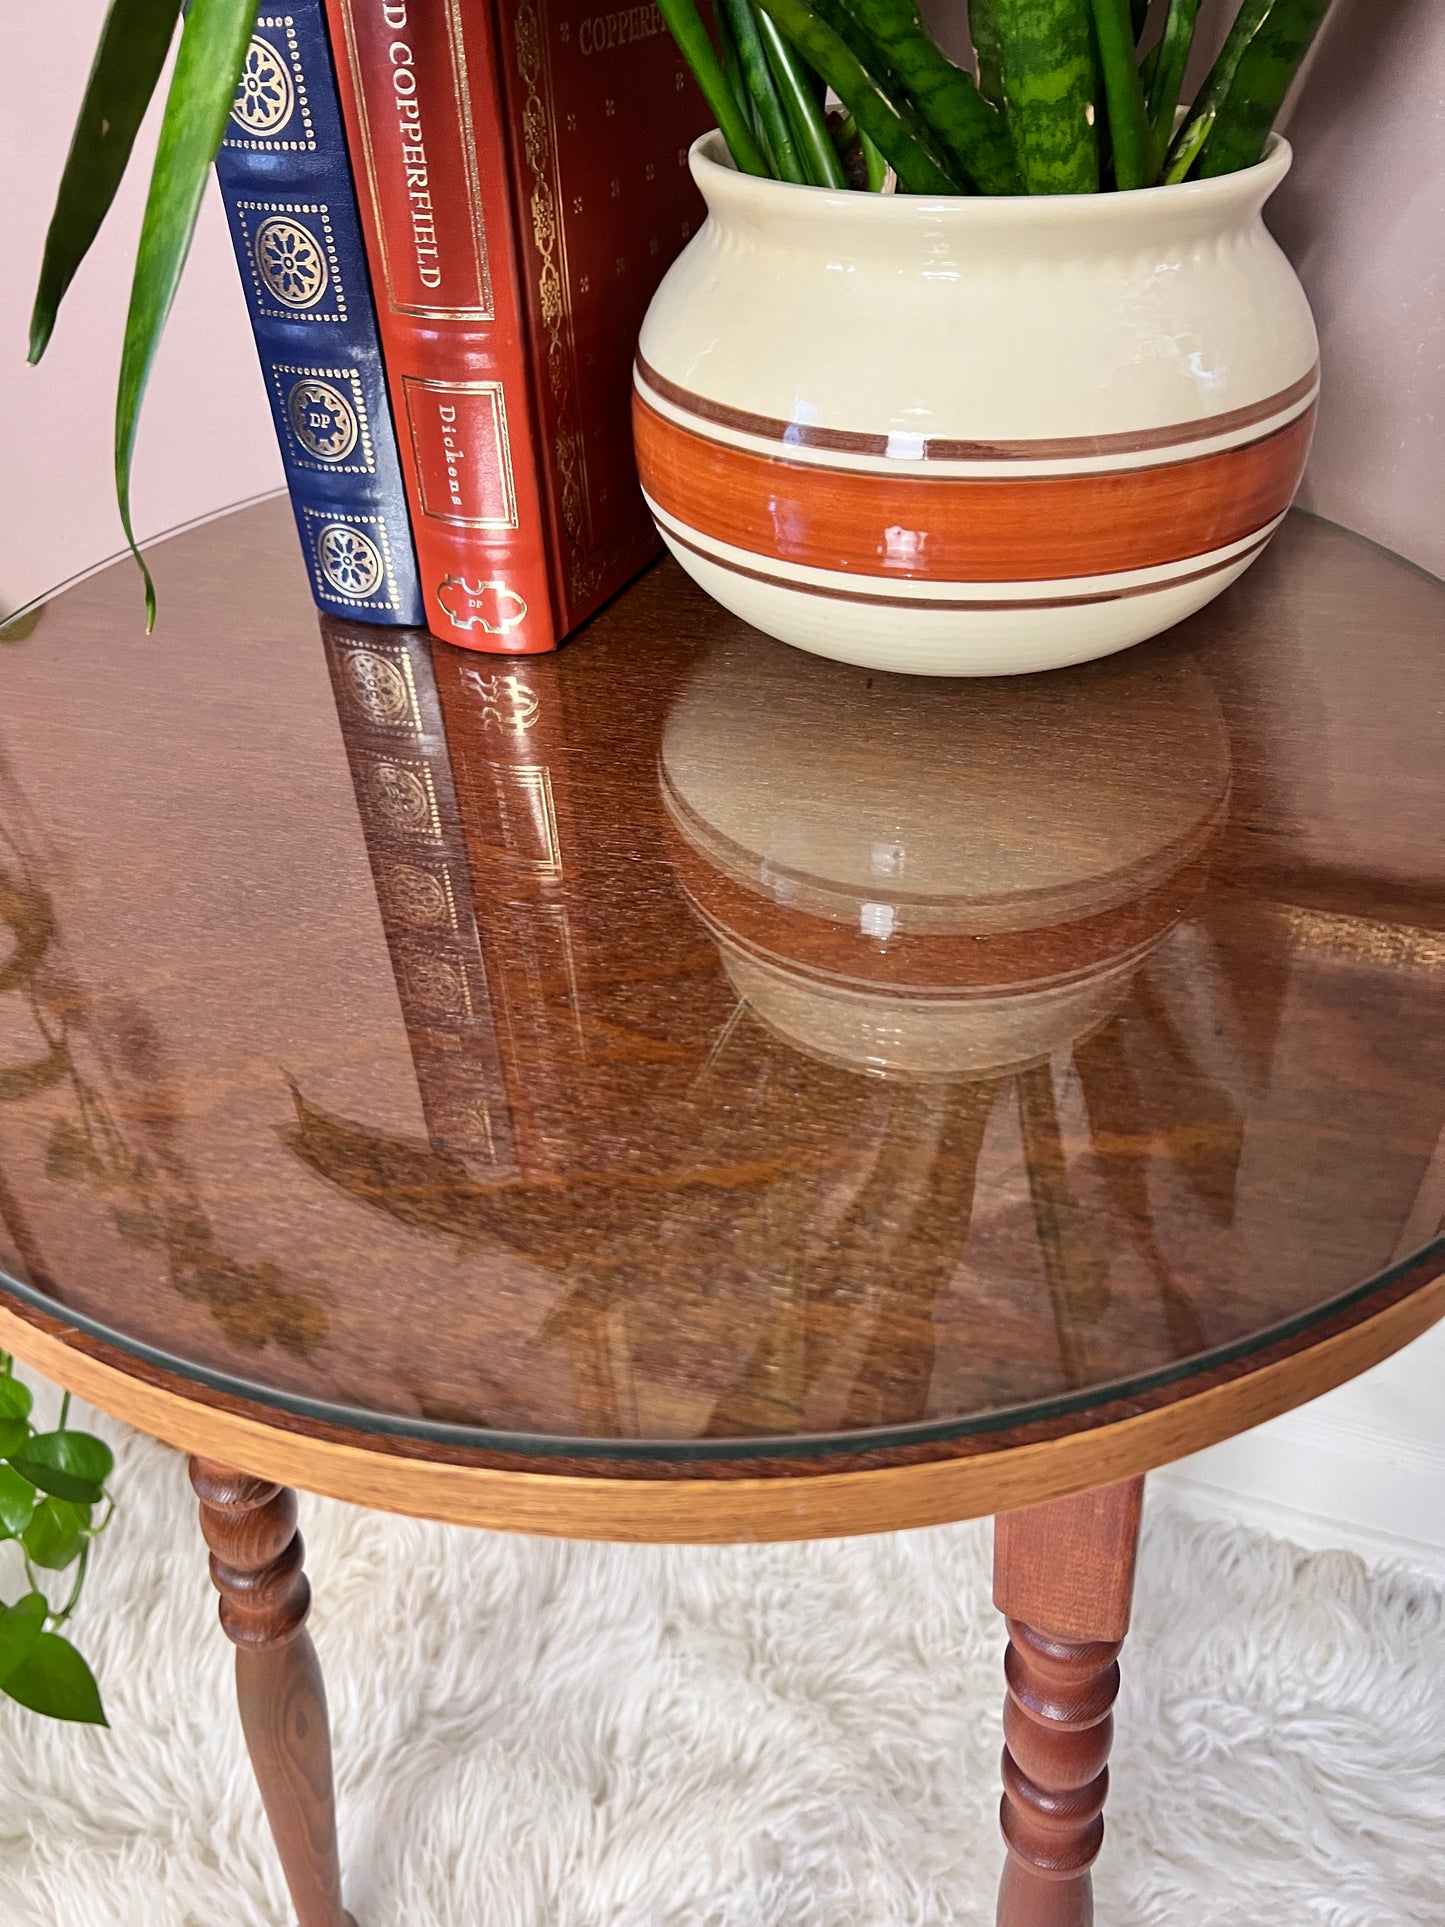 The Lovely Round Side Table